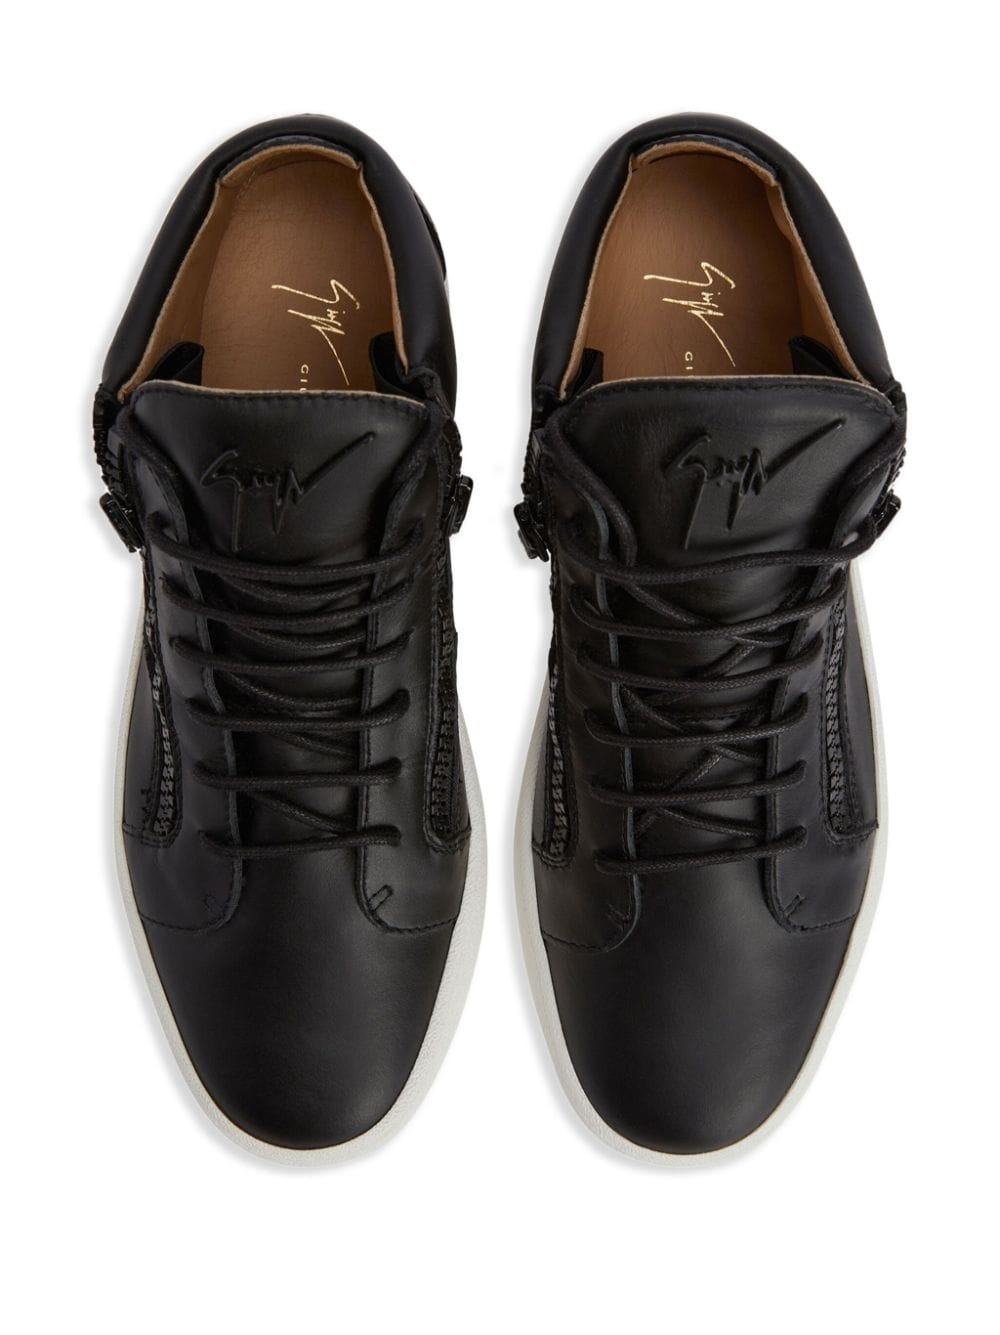 Kriss leather sneakers - 4